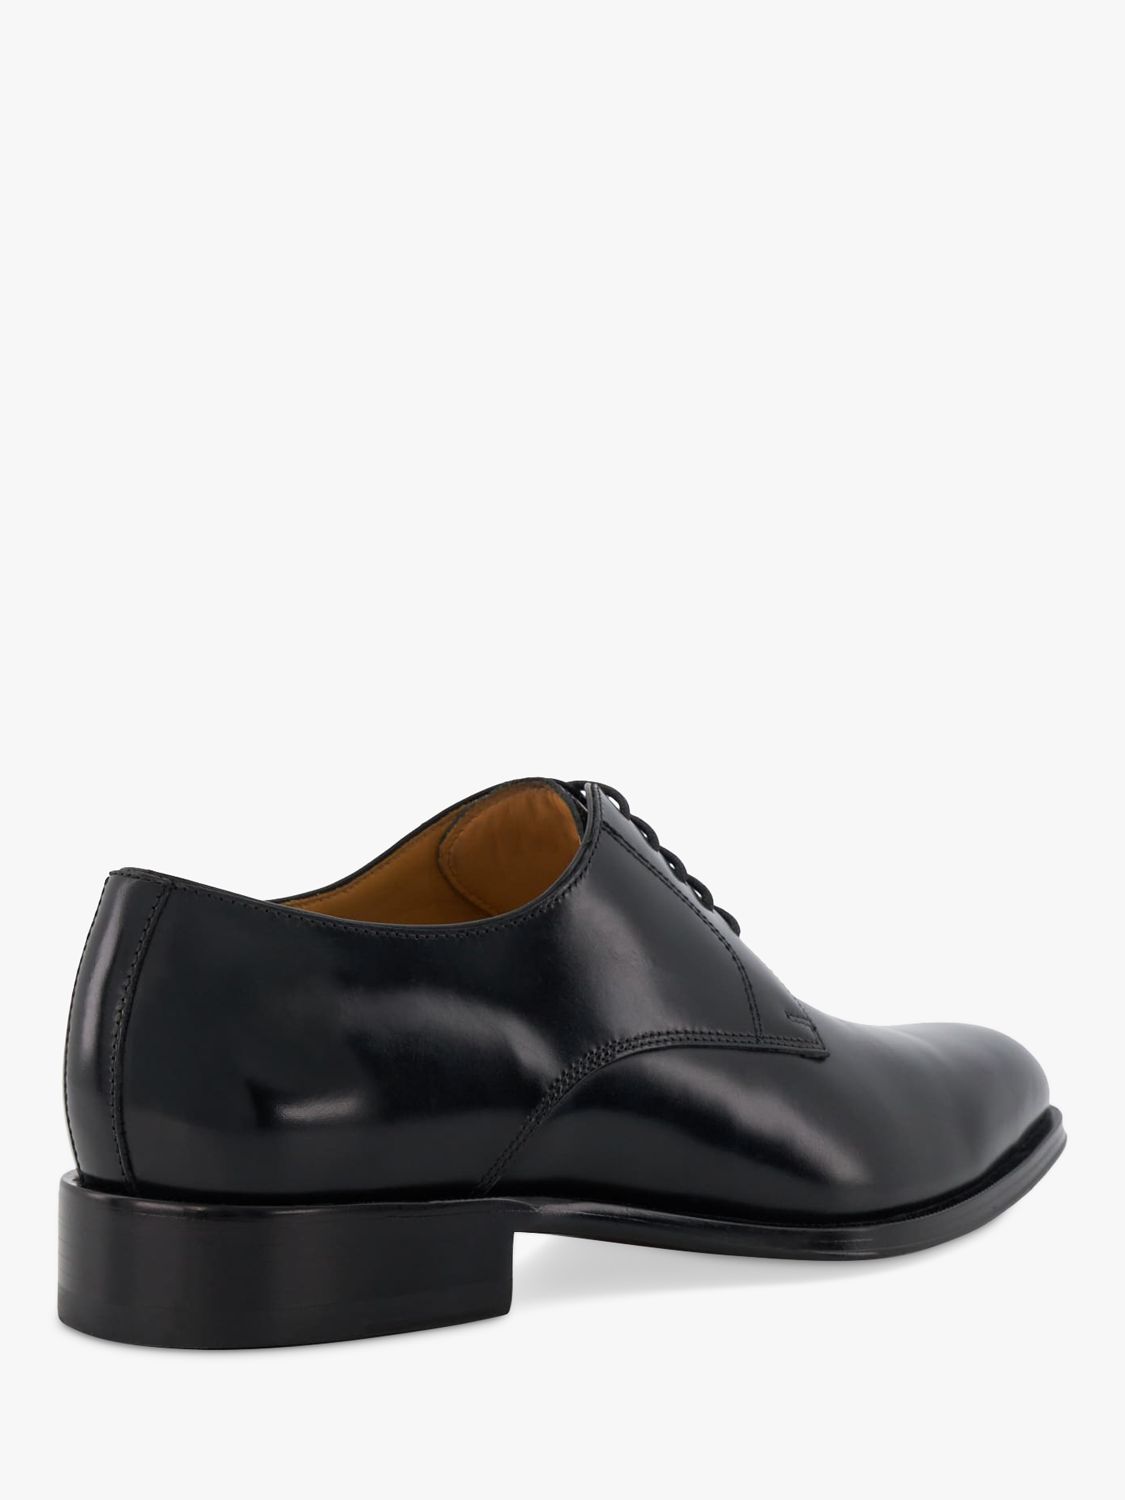 Dune Salisburry Derby Leather Shoes, Black at John Lewis & Partners